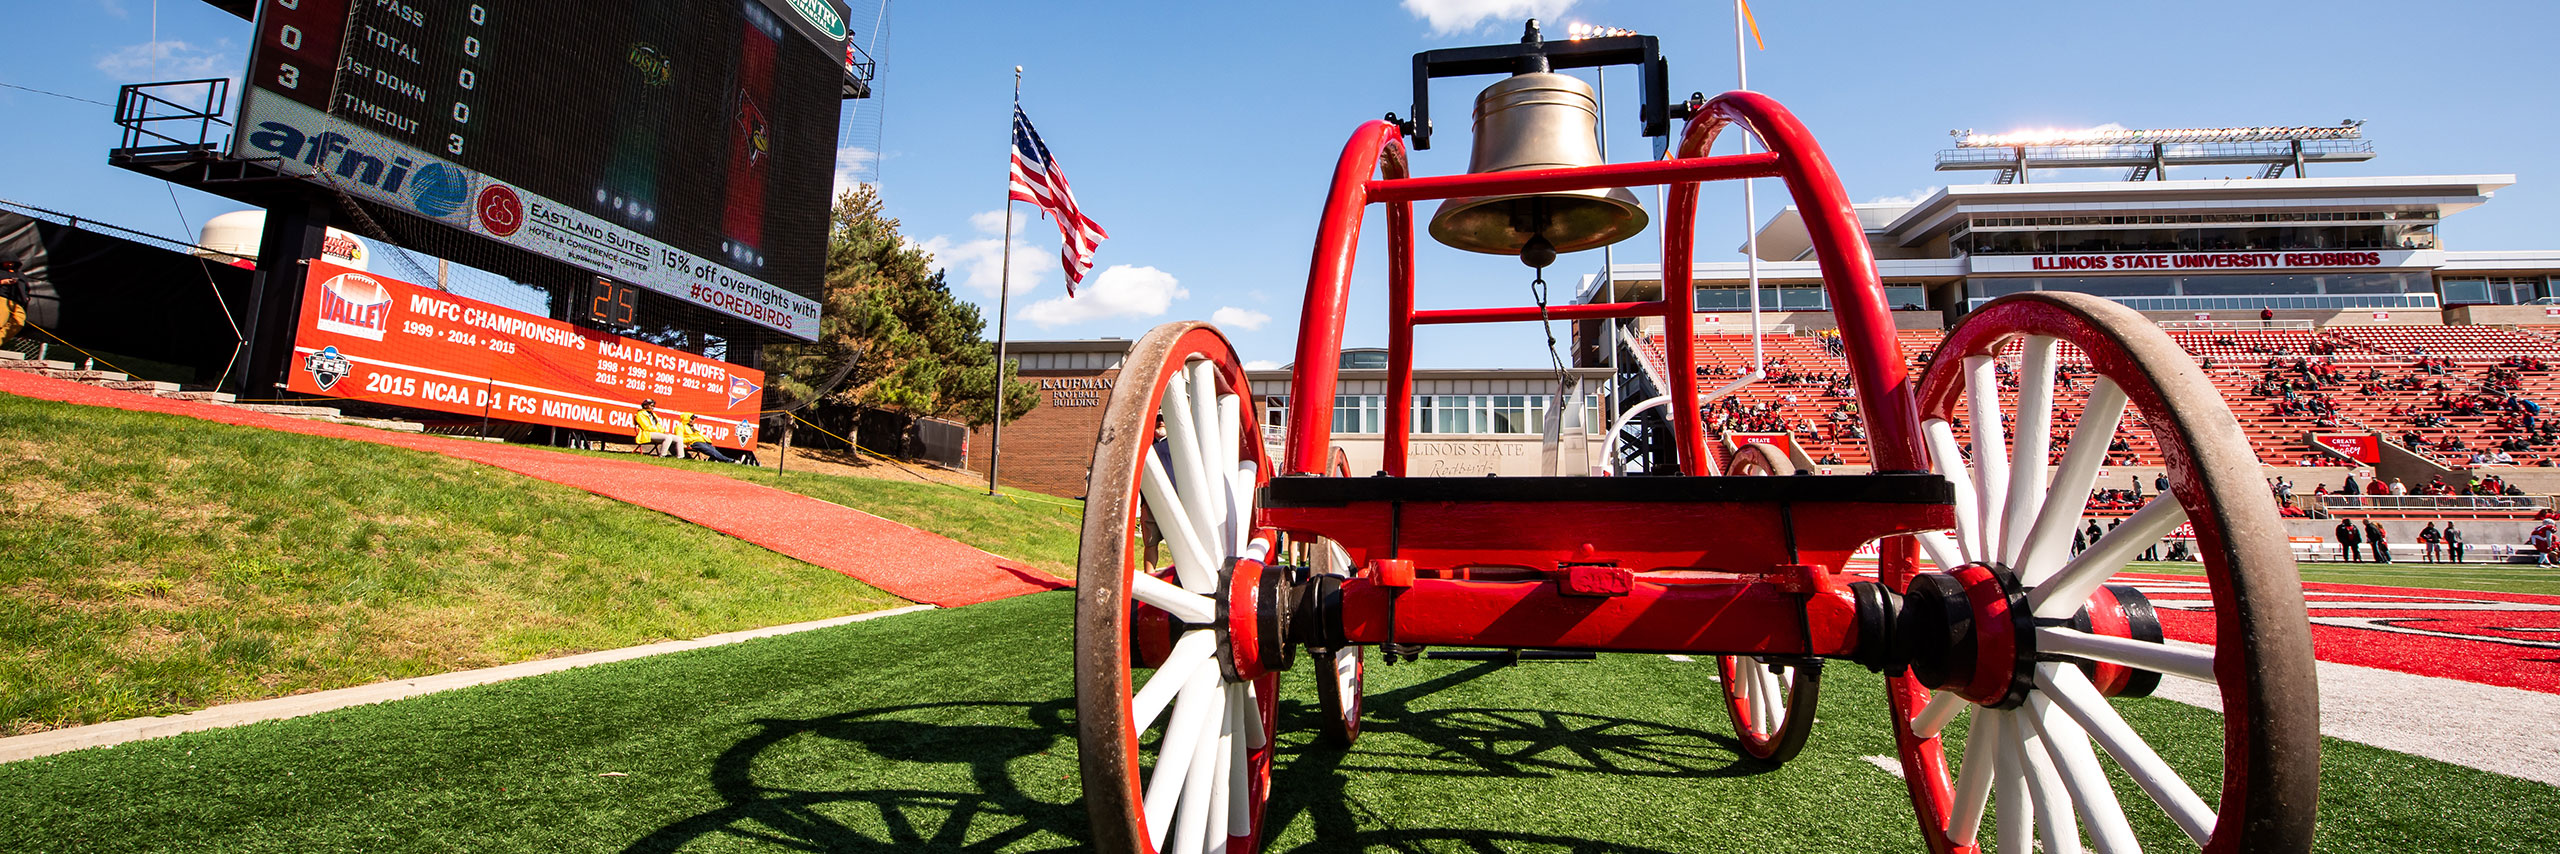 An image of the victory bell on the football field